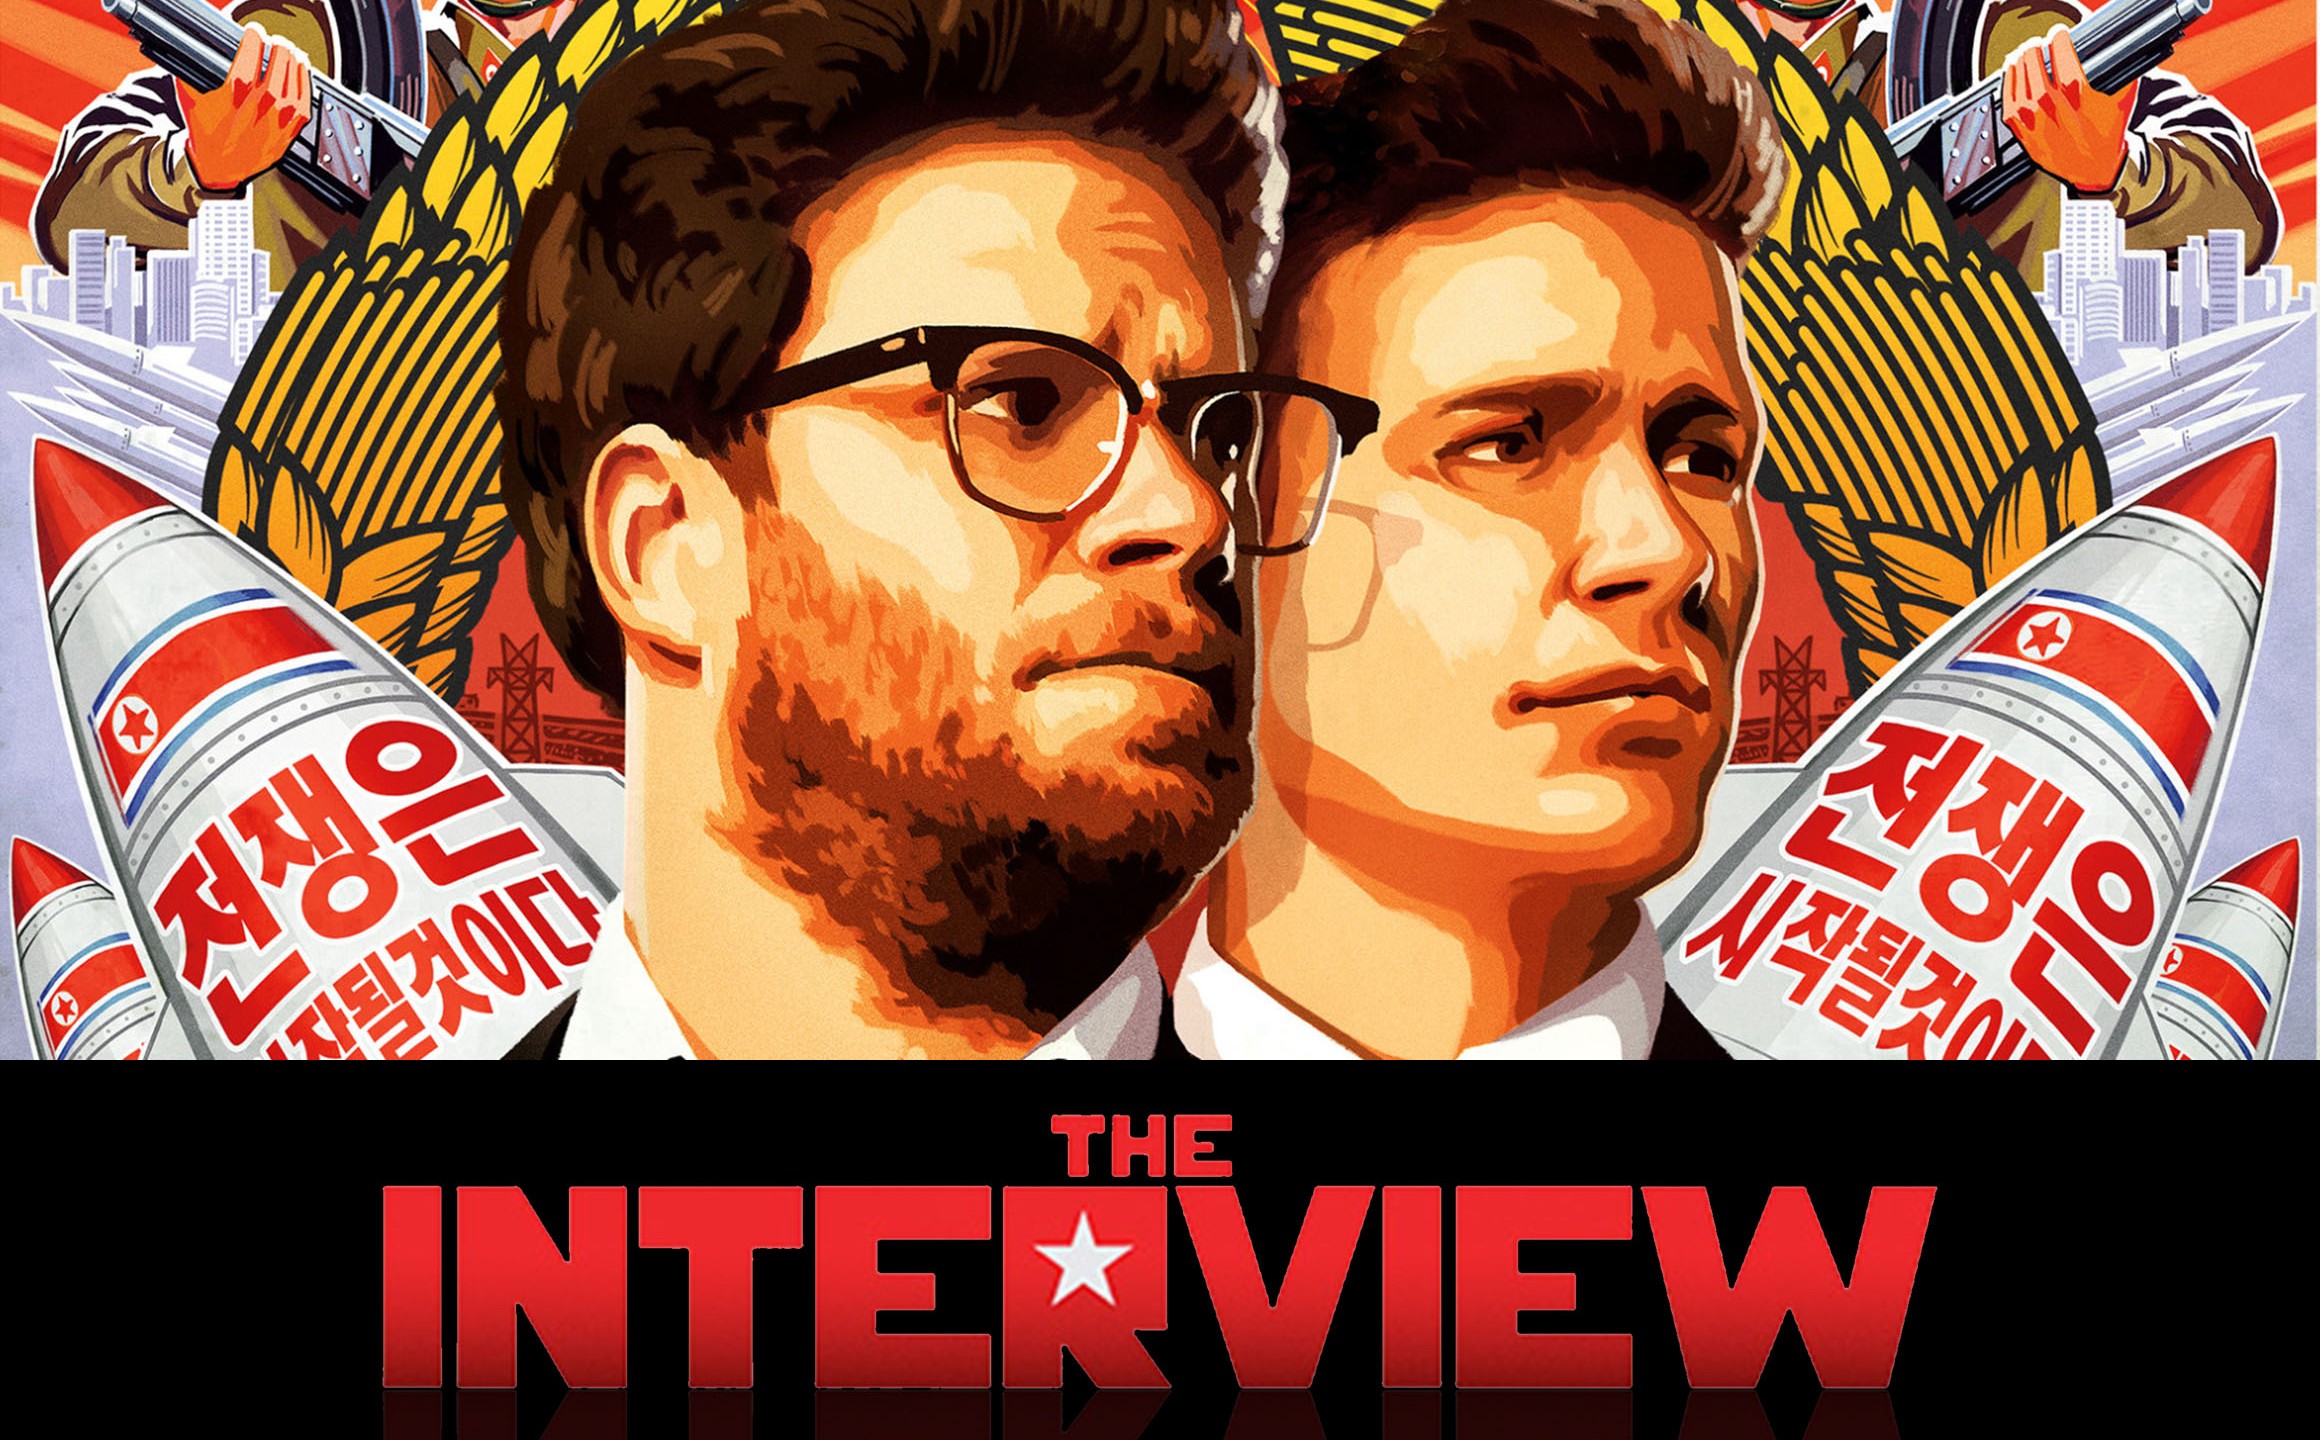 2320x1440 > The Interview Wallpapers